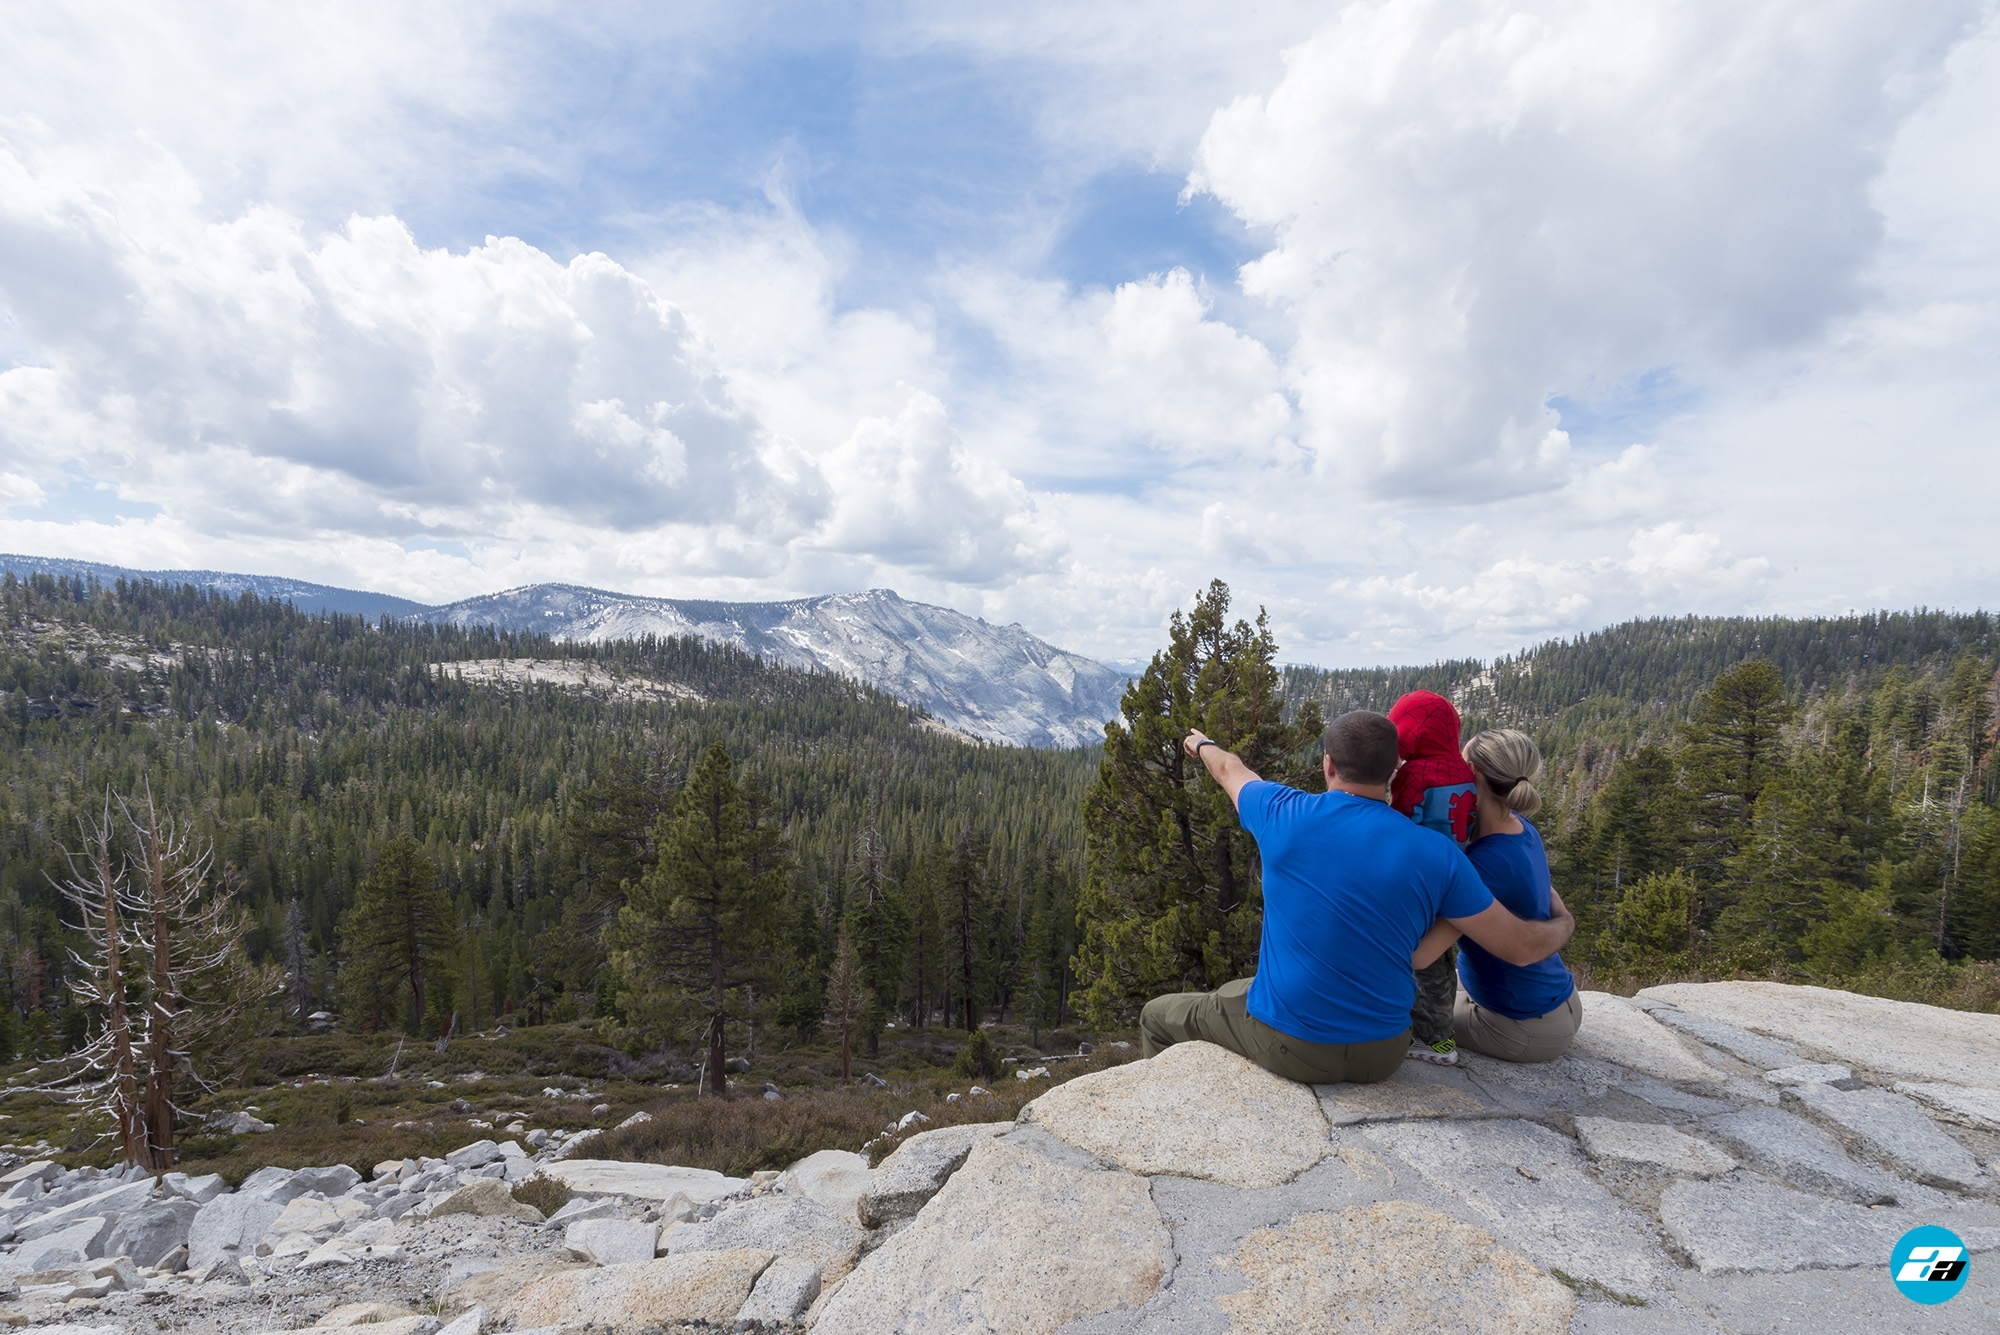 Yosemite National Park, California, USA. Landscape. Mountain View. Forest. Family